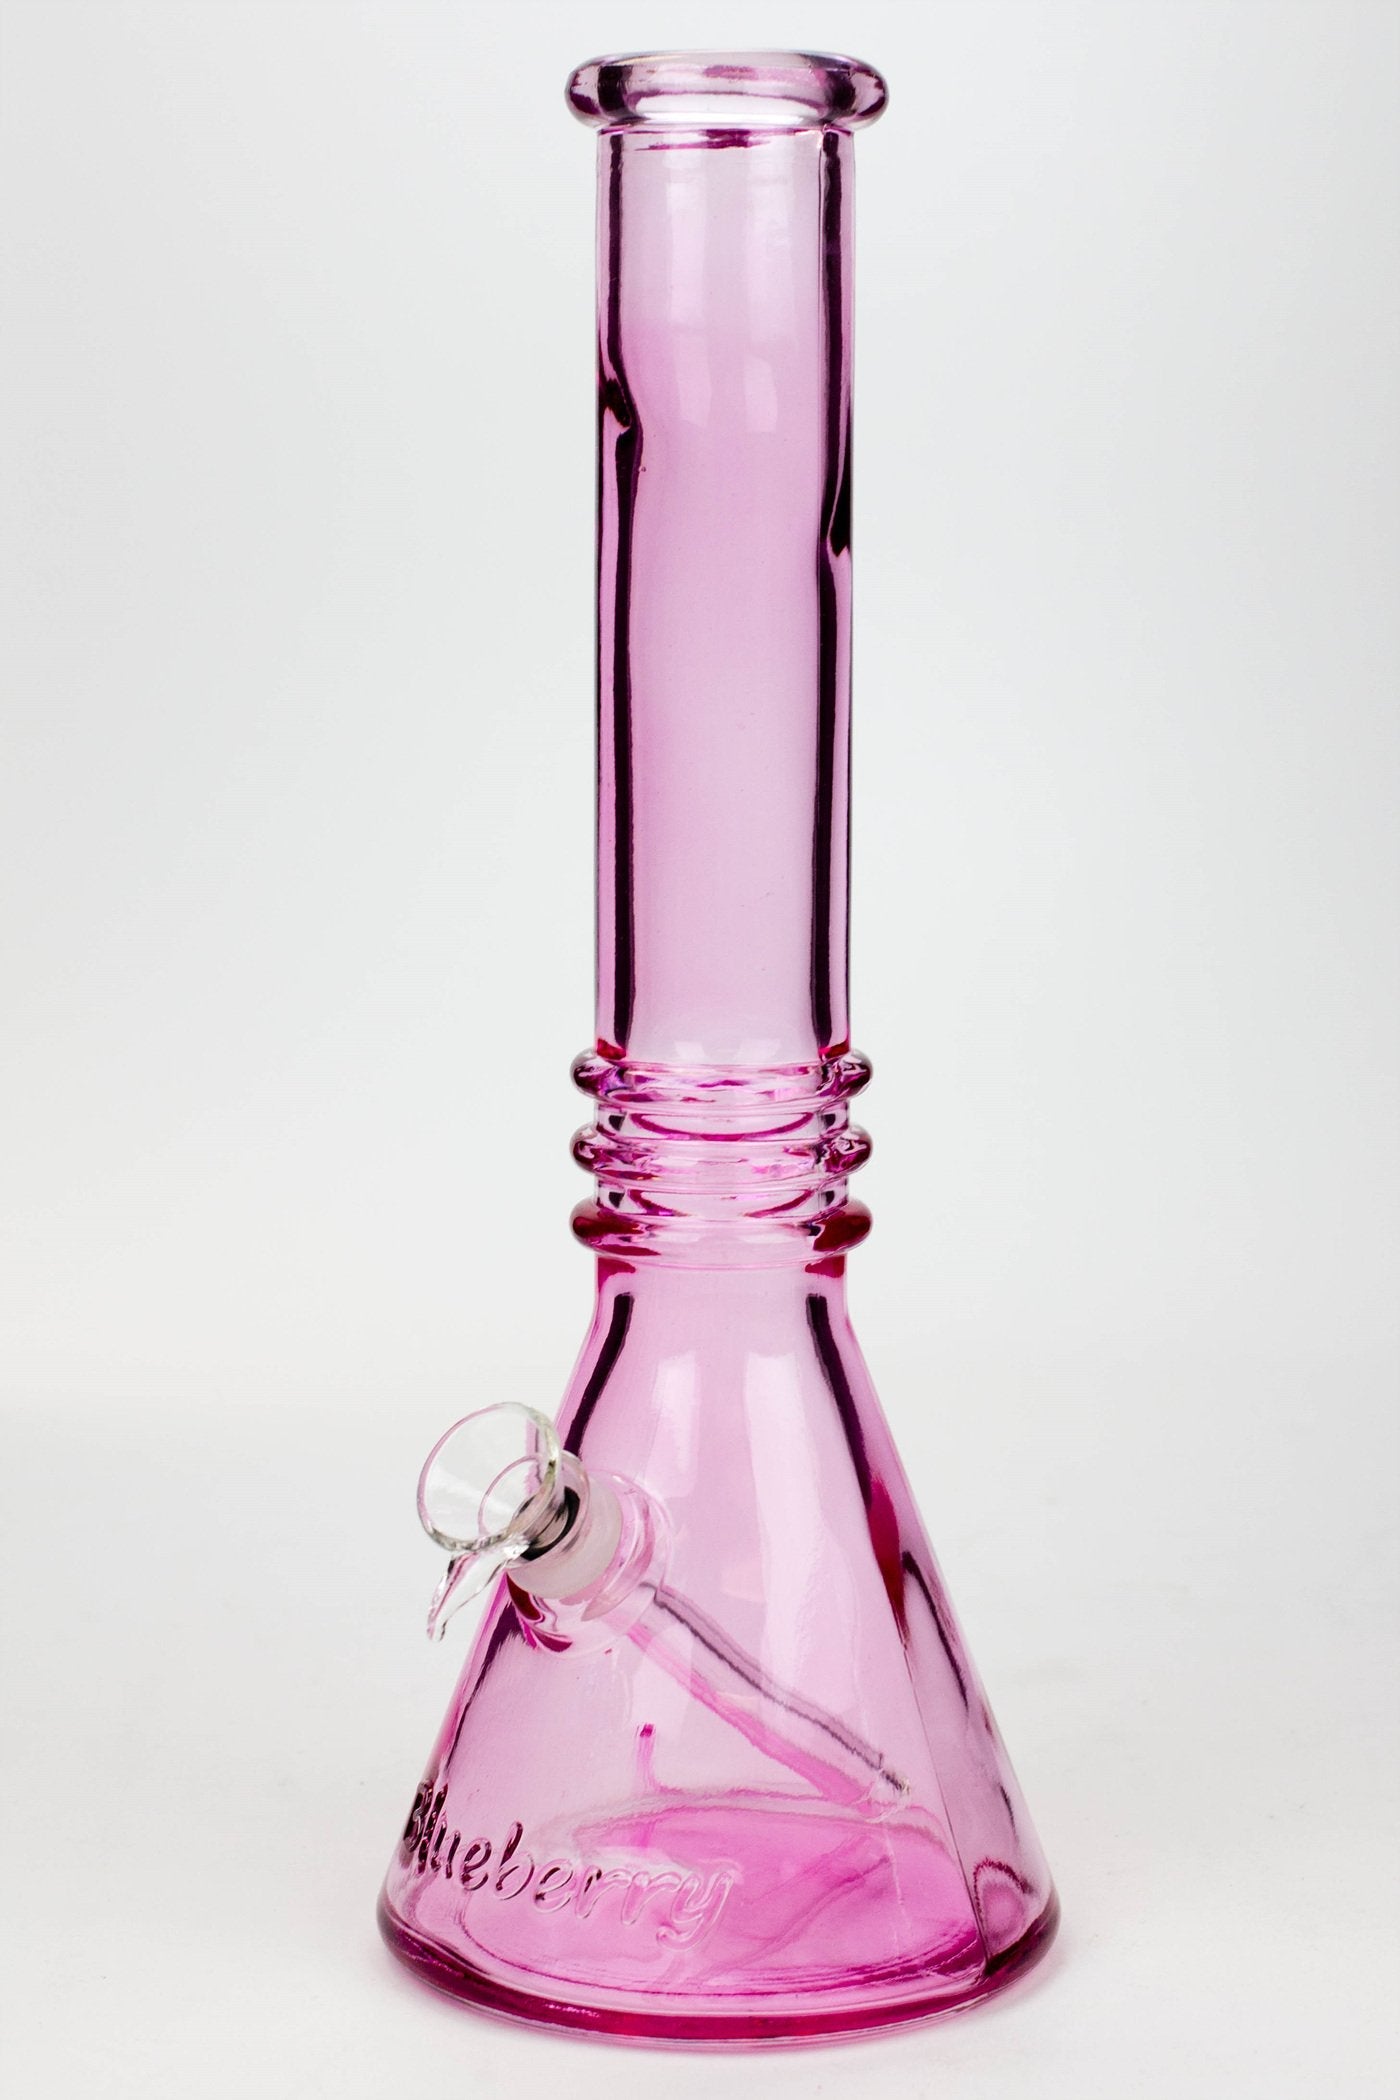 12" colored soft glass water bong Flower Power Packages Pink 